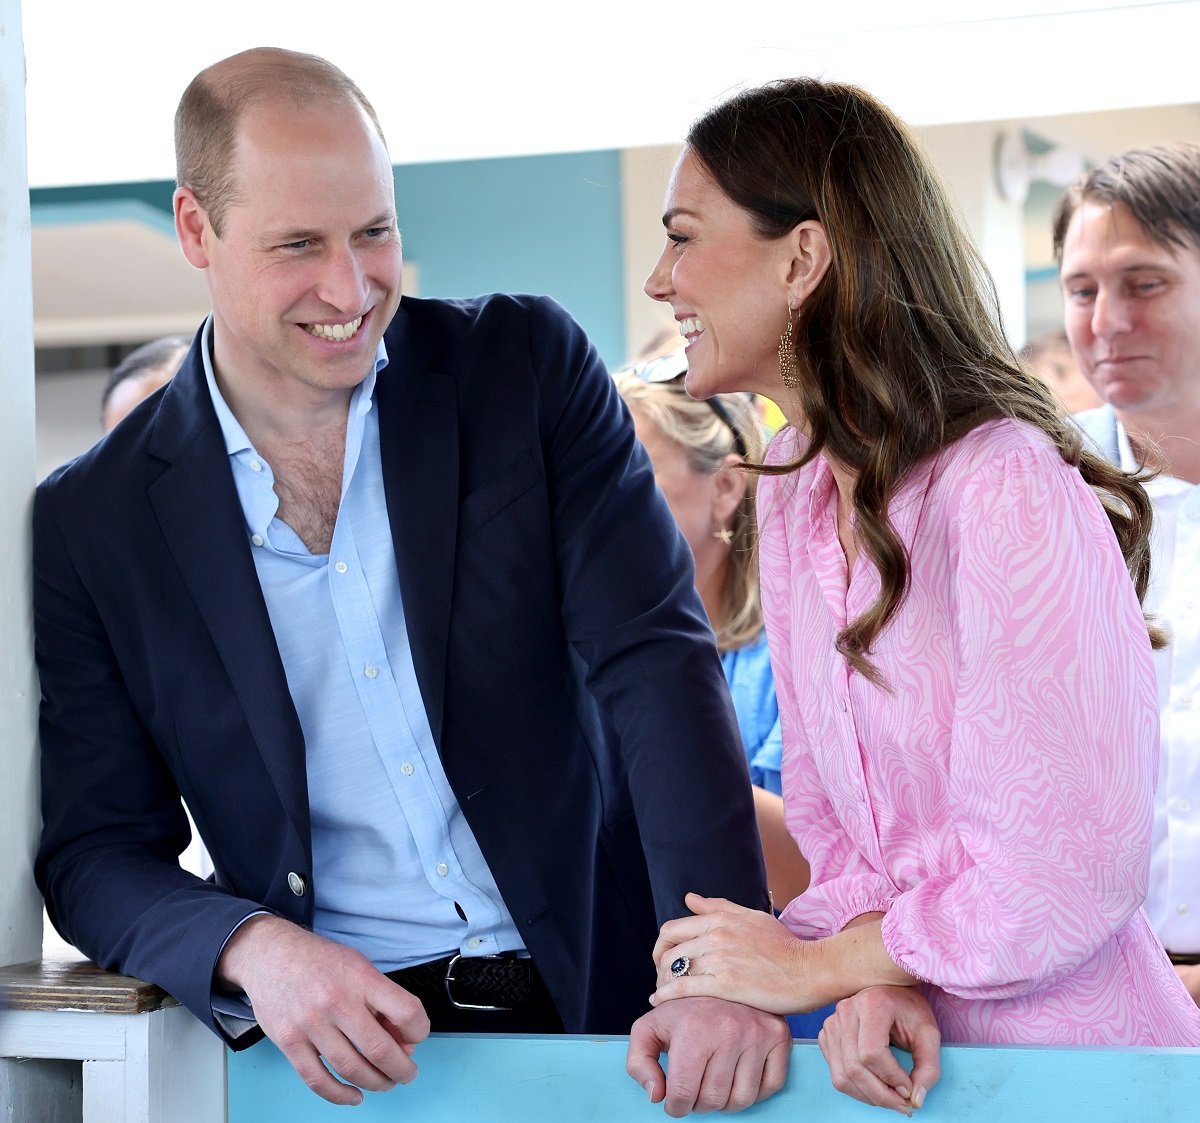 Prince William and Kate Middleton showed some PDA with the duchess resting her hand on the duke's during a visit to Abaco